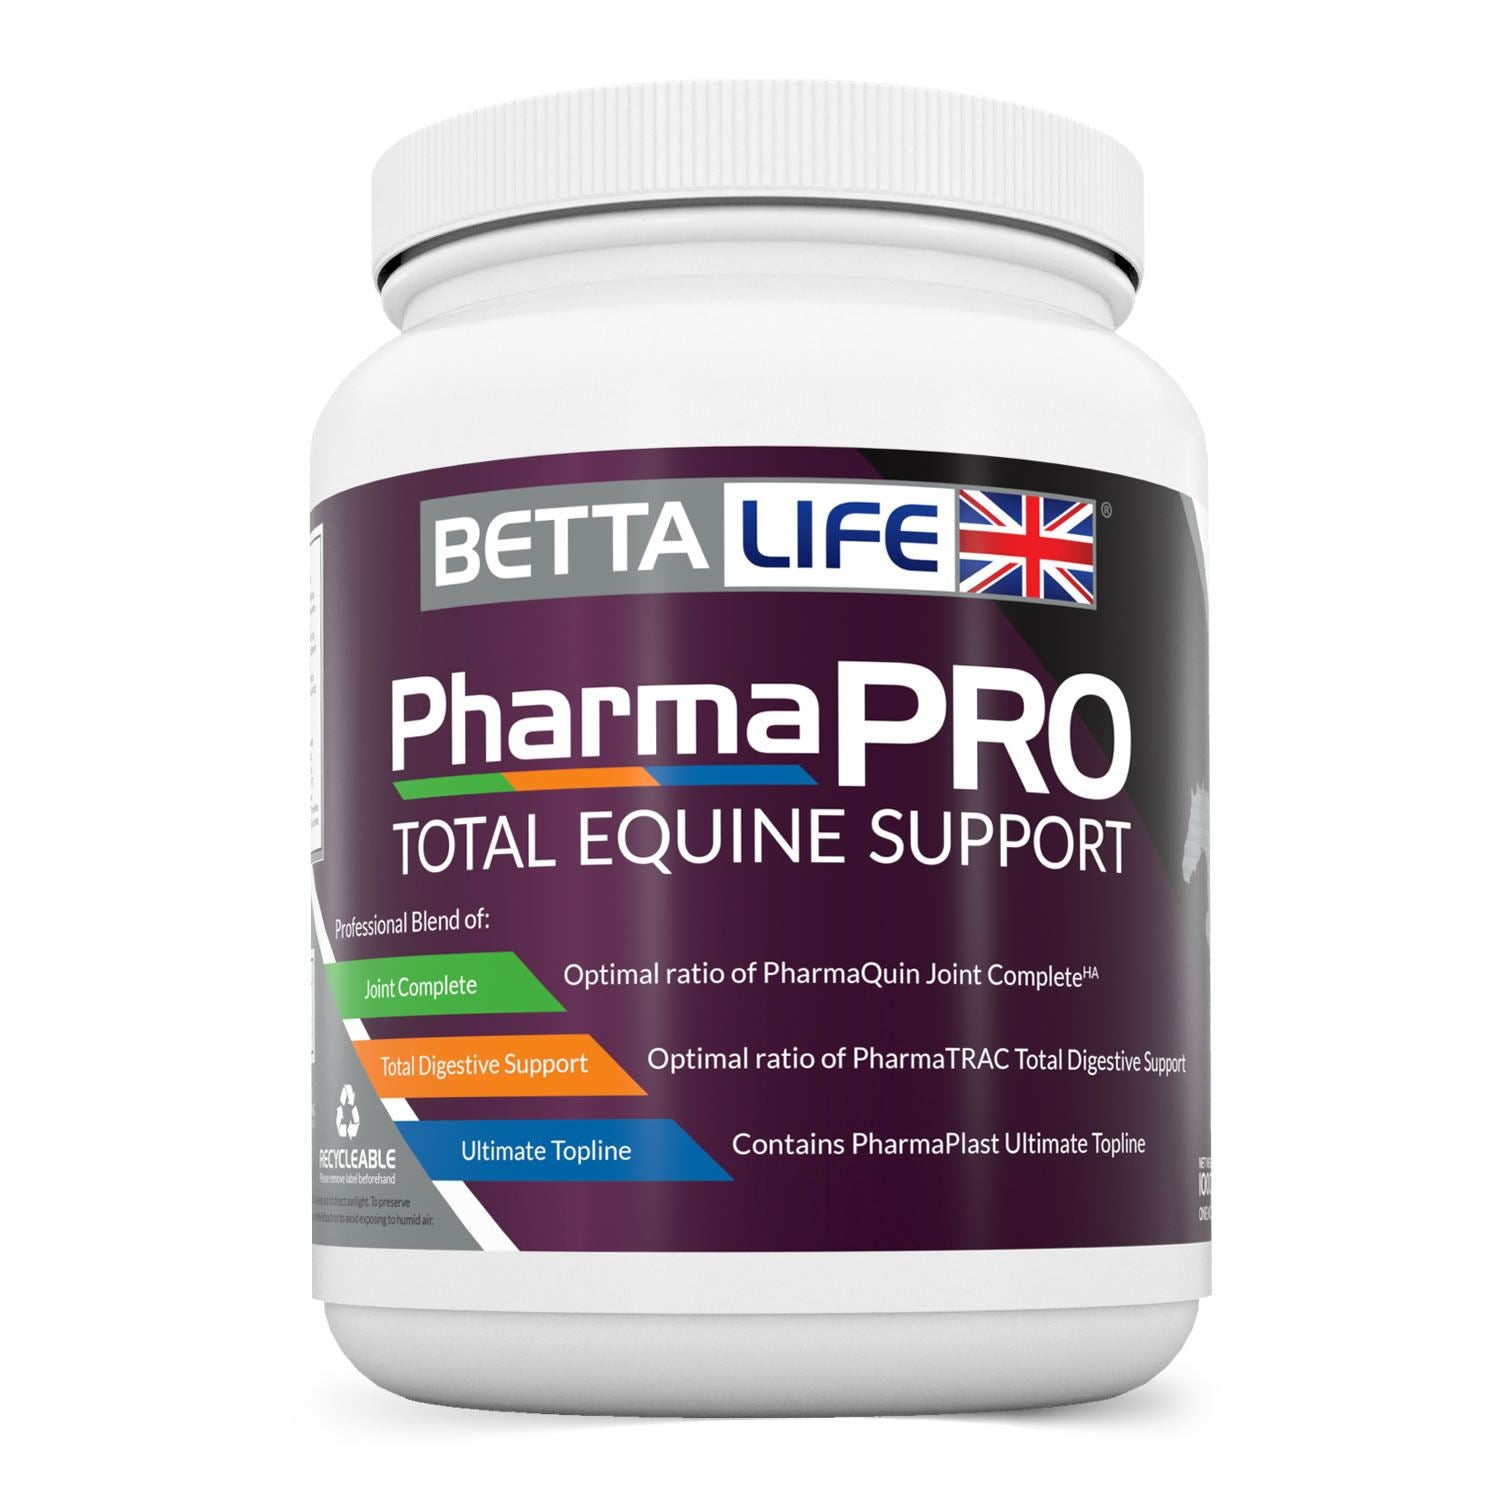 Bettalife Pharmapro Equine Support - Just Horse Riders